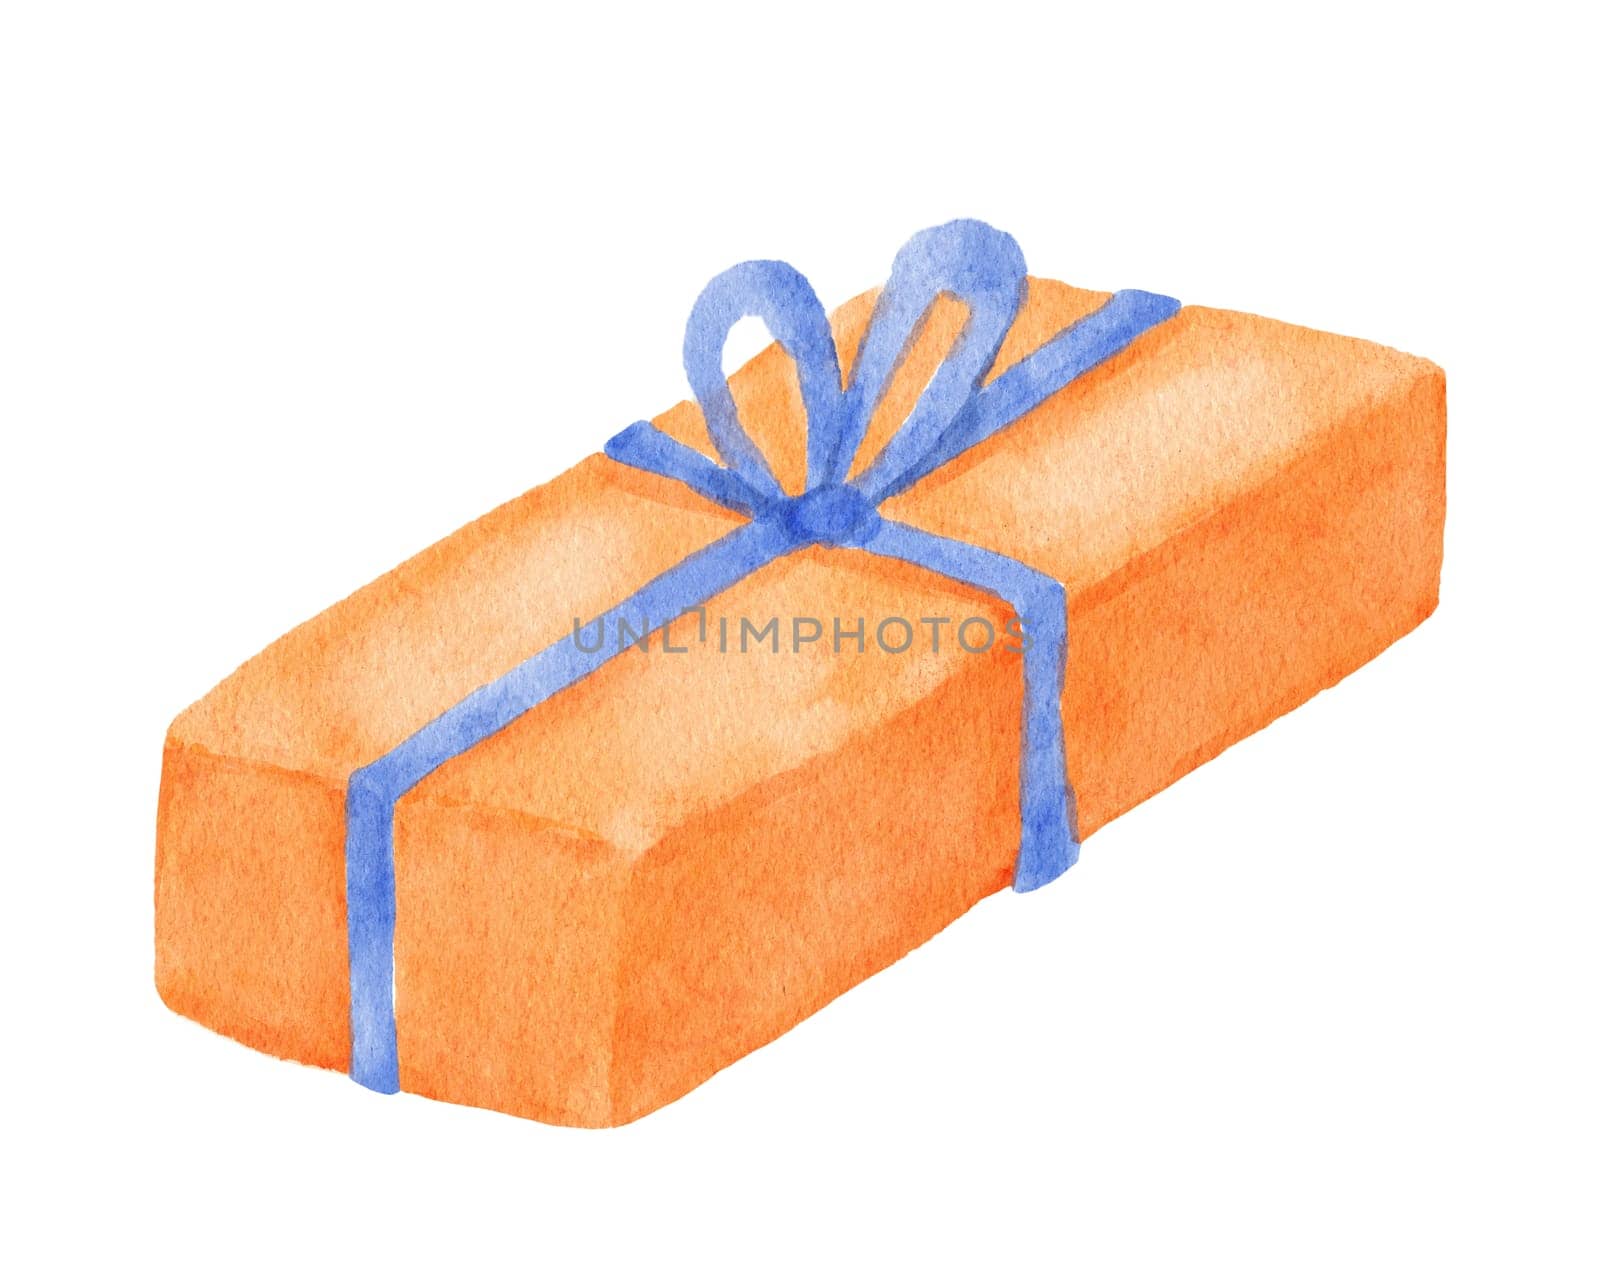 Watercolor drawing funny gift box with bow. Hand drawn illustration isolated on white. Surprise for Christmas or birthday